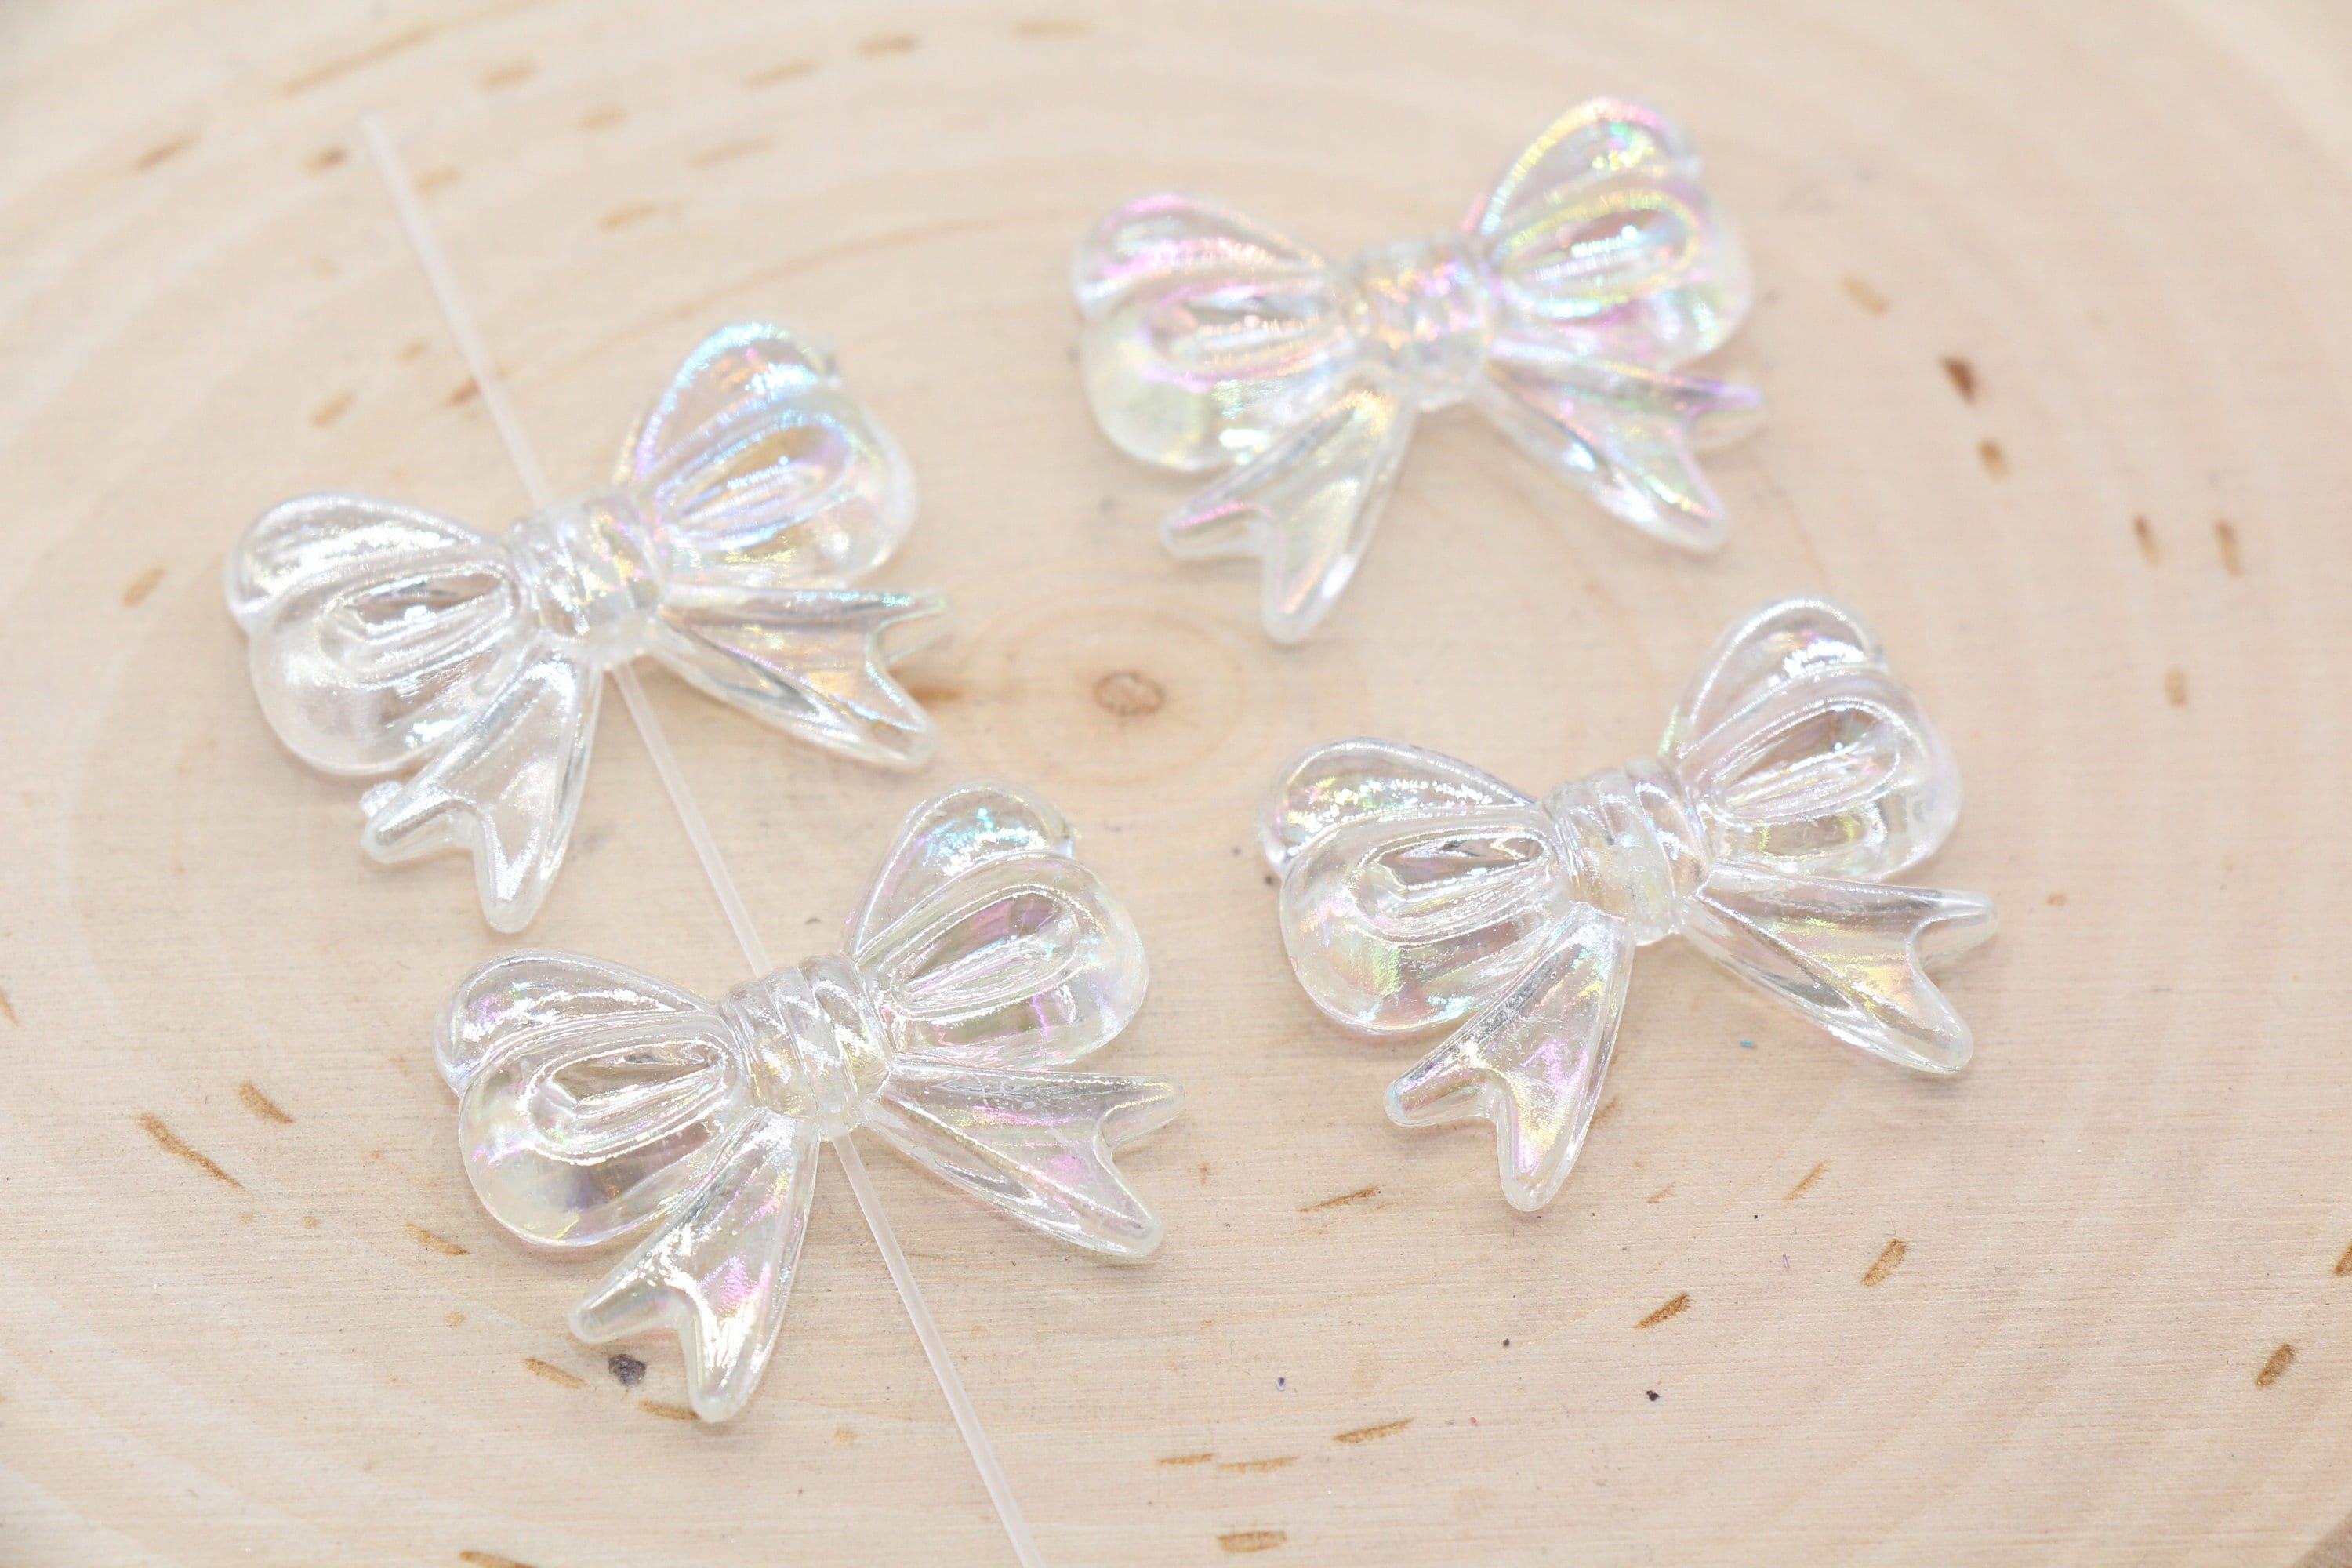 Wholessale 100pcs 29*23mm Transparent Clear Ribbon Knot Bow Beads Plastic  Acrylic Loose Lucite Jewelry Necklace Earring Bows - (Color: as Image)